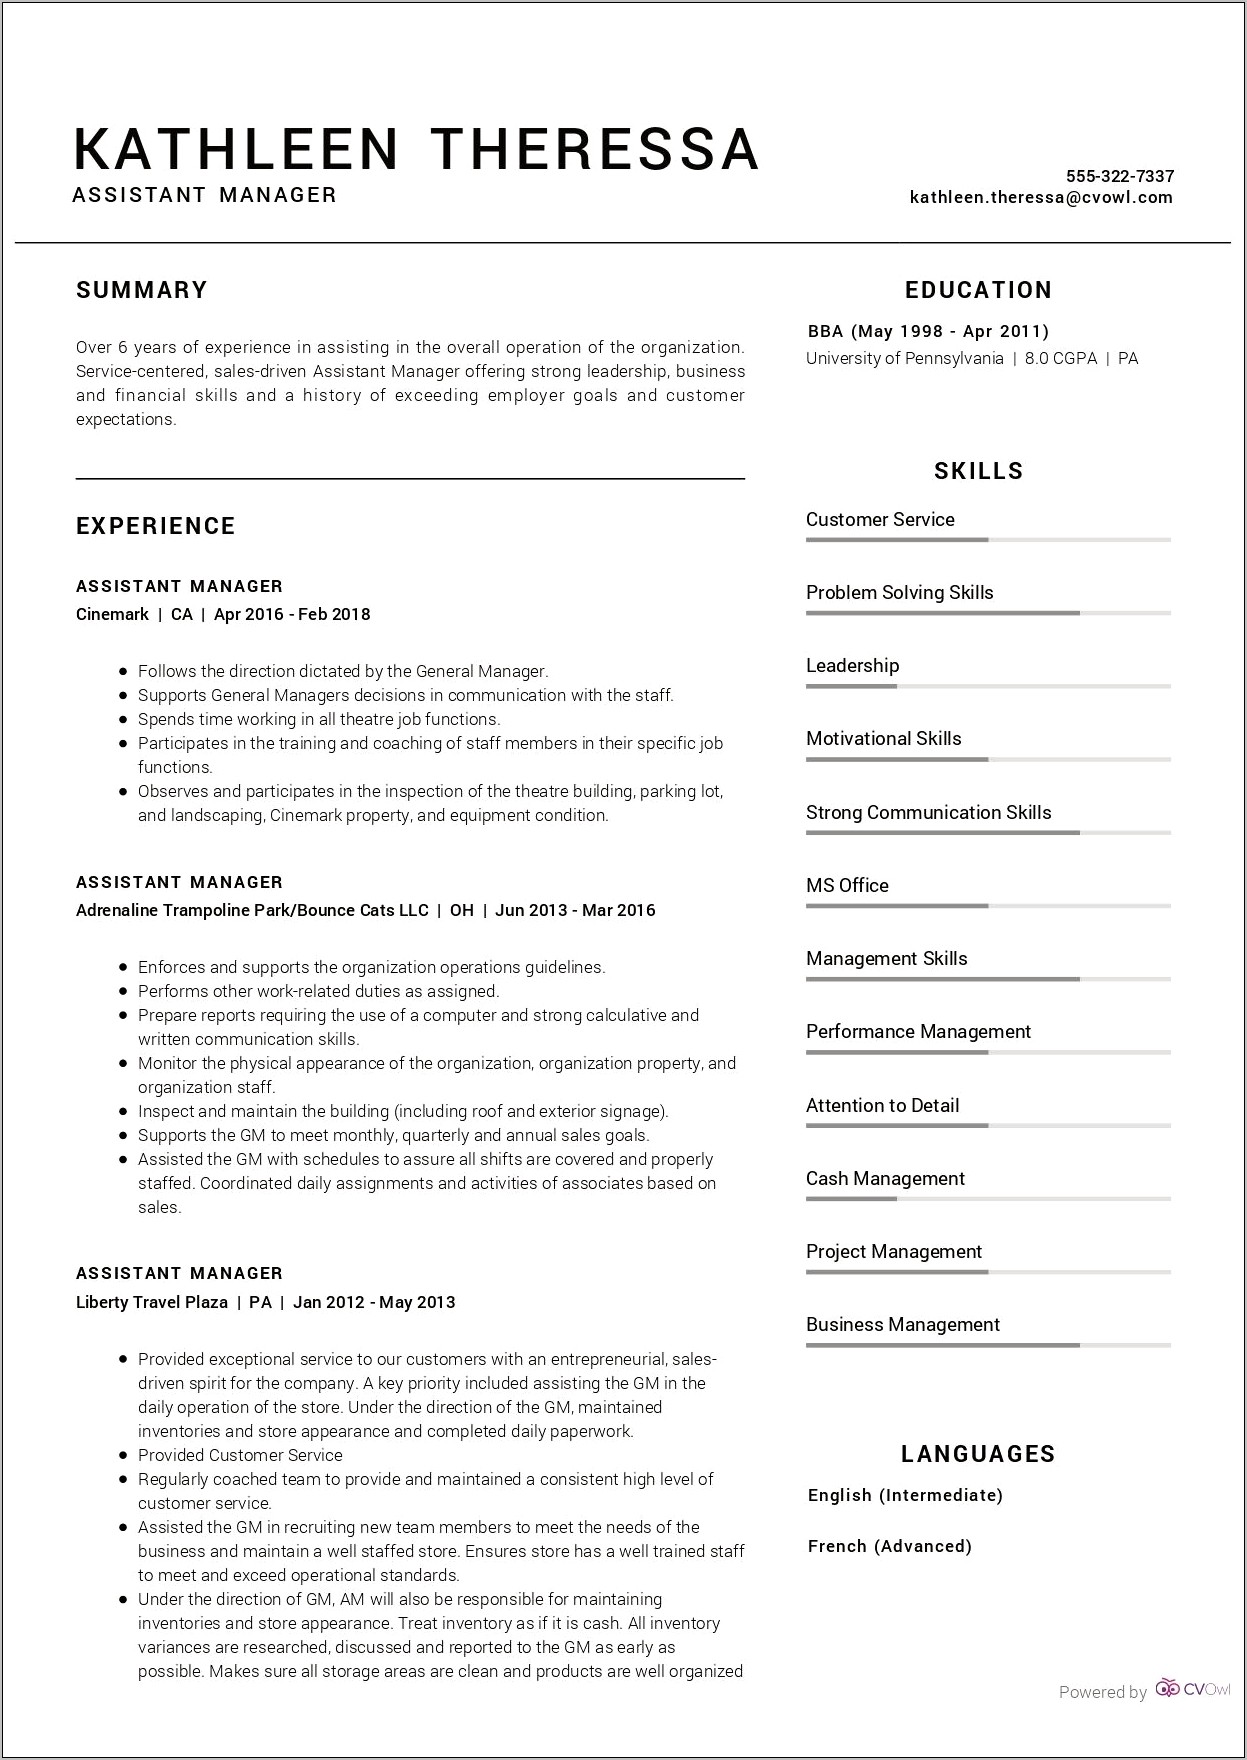 Sample Resume For Photo Assistant